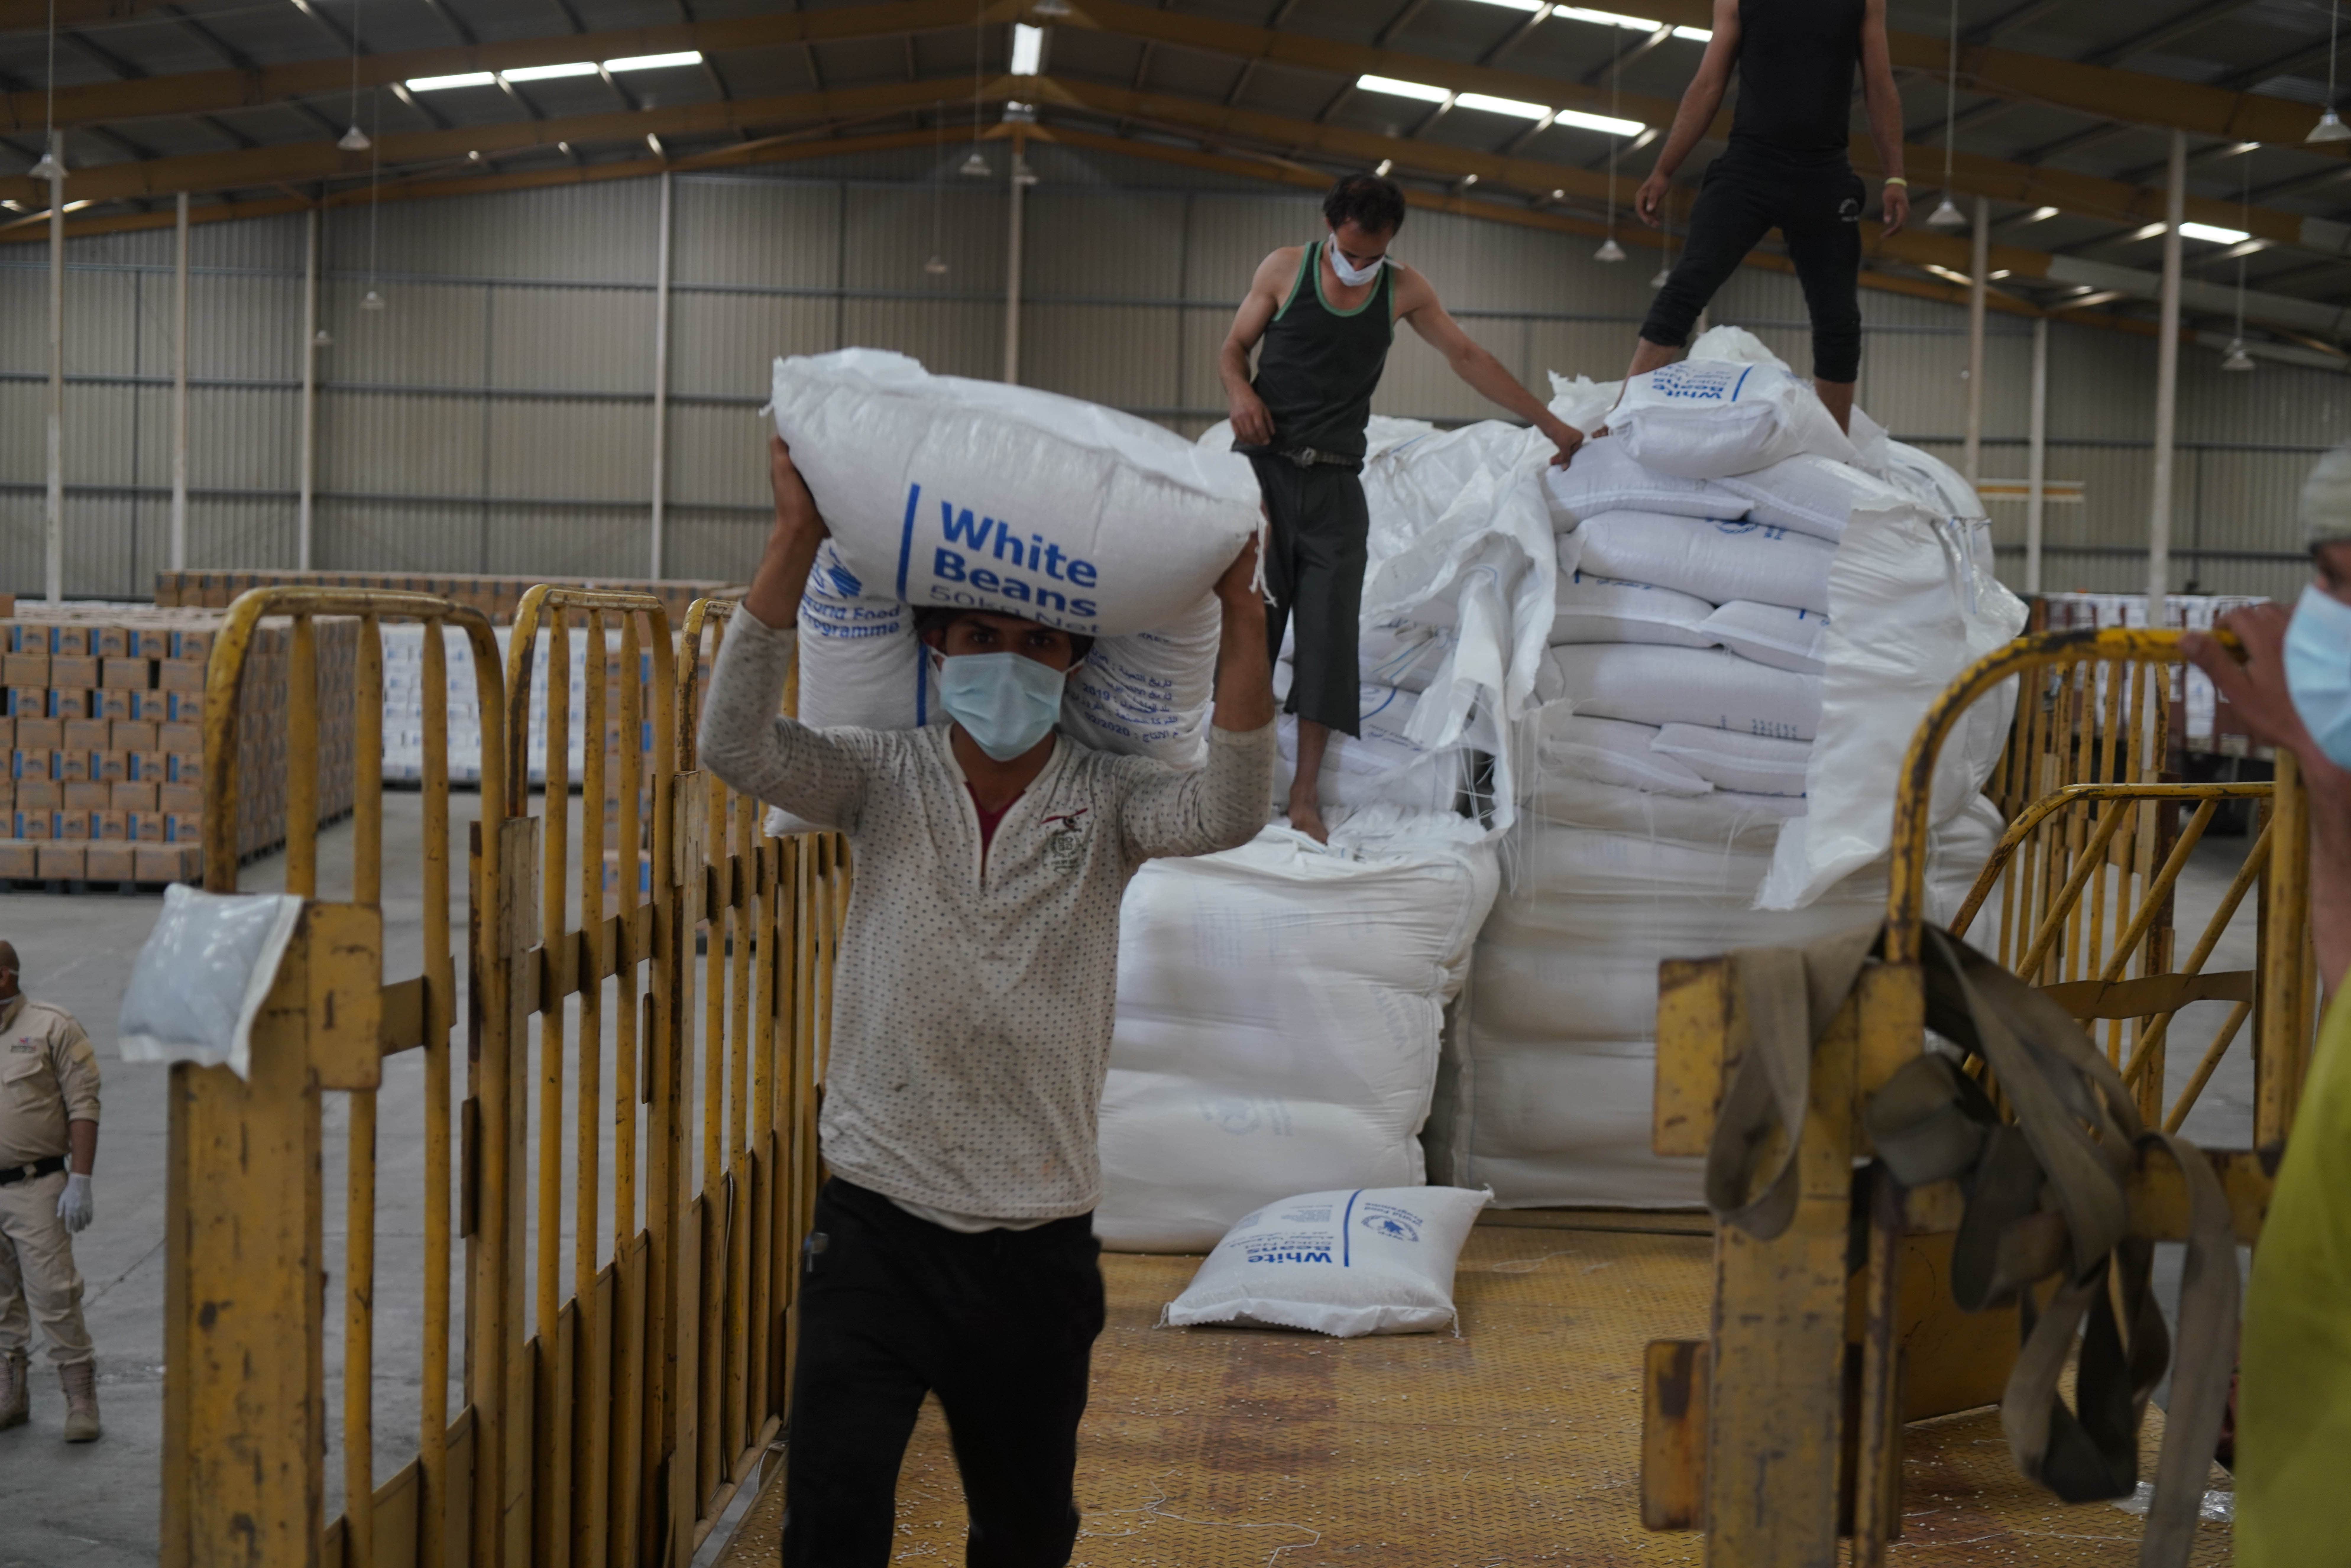 A man carries a bag of white beans in a WFP warehouse in Sana'a, Yemen